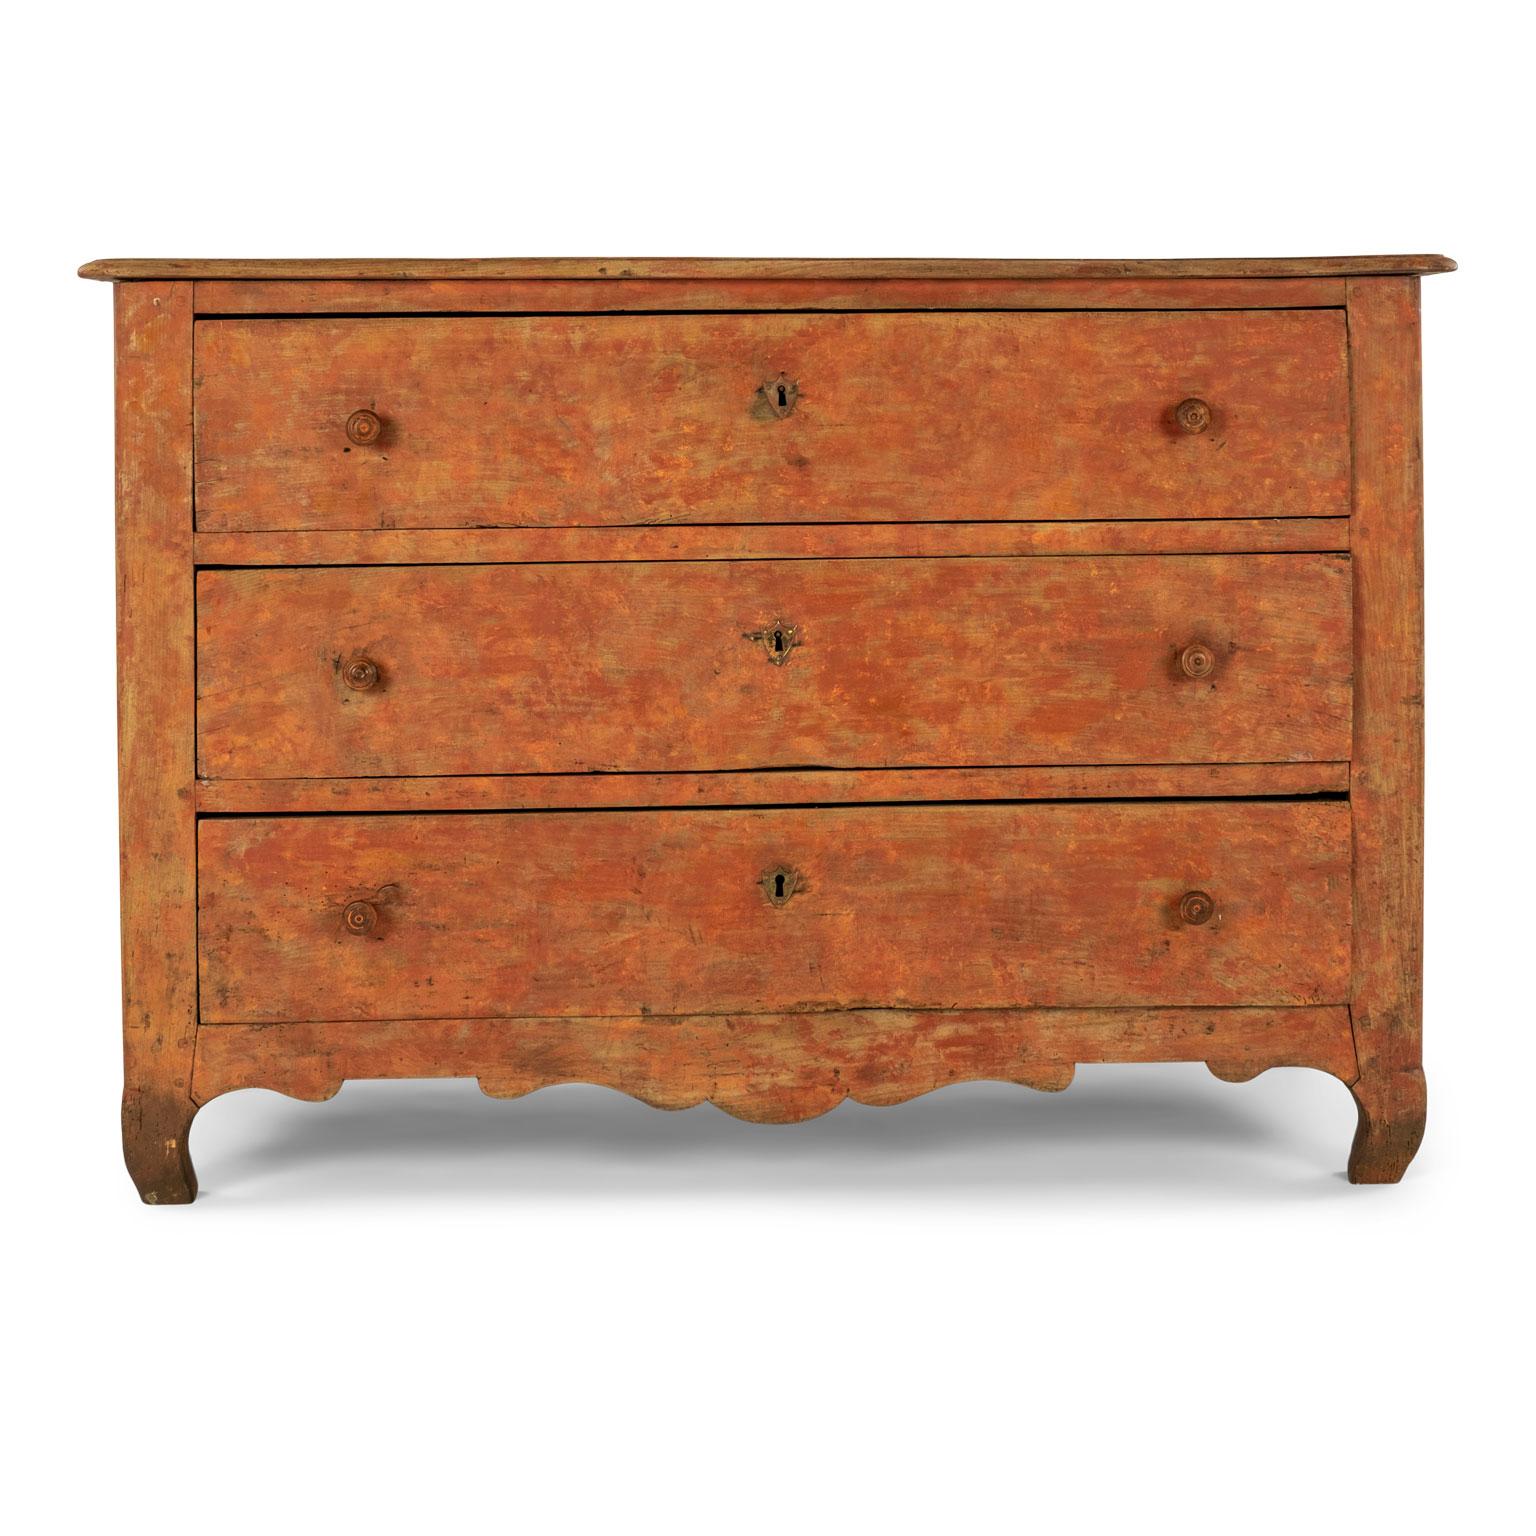 Orange painted rococo commode dating to the mid-18th century. Three-drawer commode with turned knob pulls. Scraped back to original orange paint. Excellent condition. Sturdy and stable. Mortise and tenon joints are newly tightened. Dovetailed